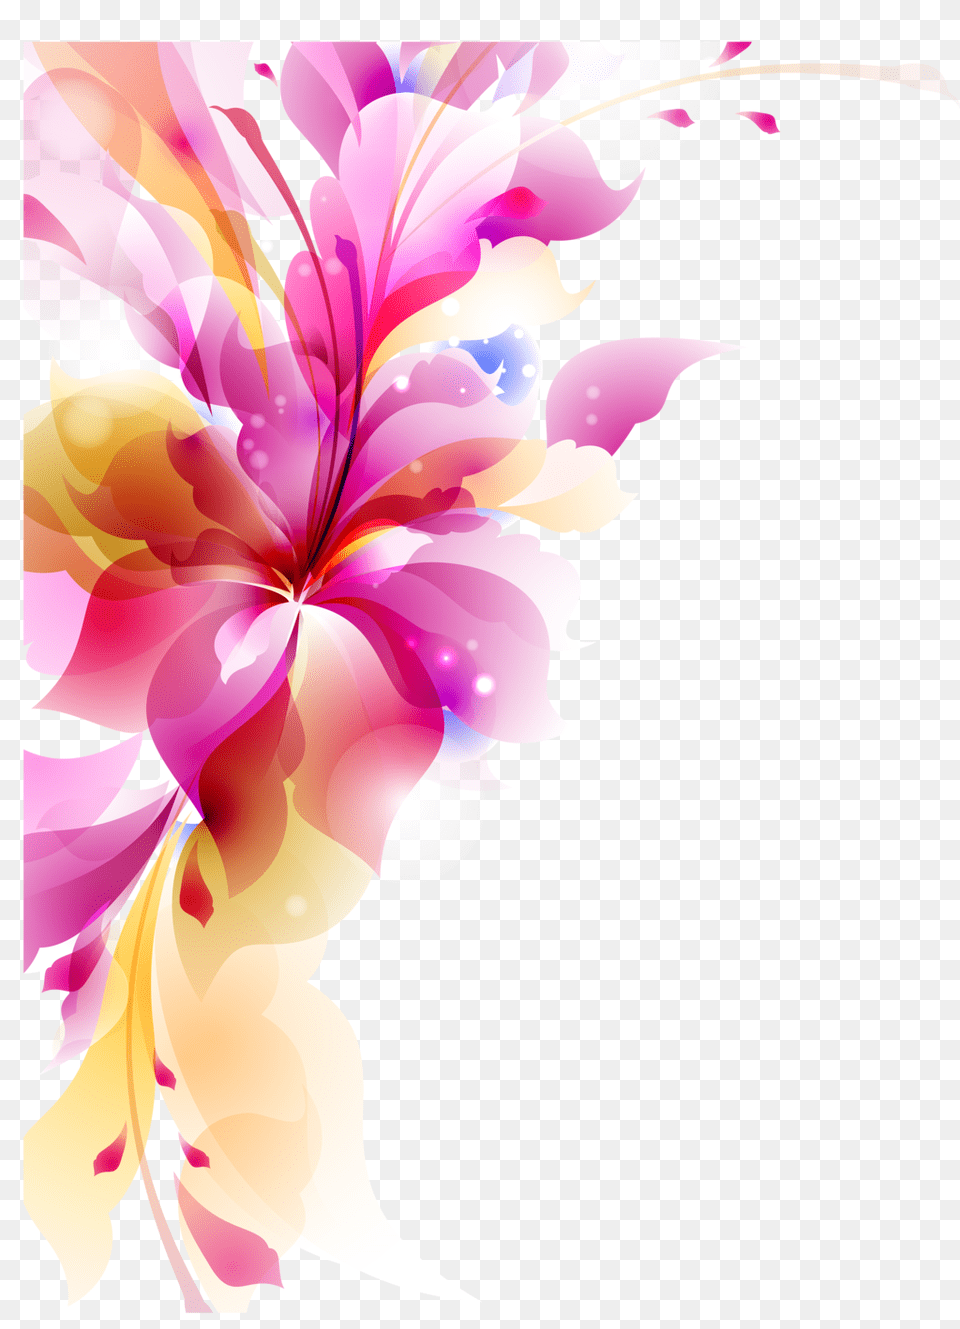 Abstract Flower Transparentpng Vector Flowers In, Art, Floral Design, Graphics, Pattern Png